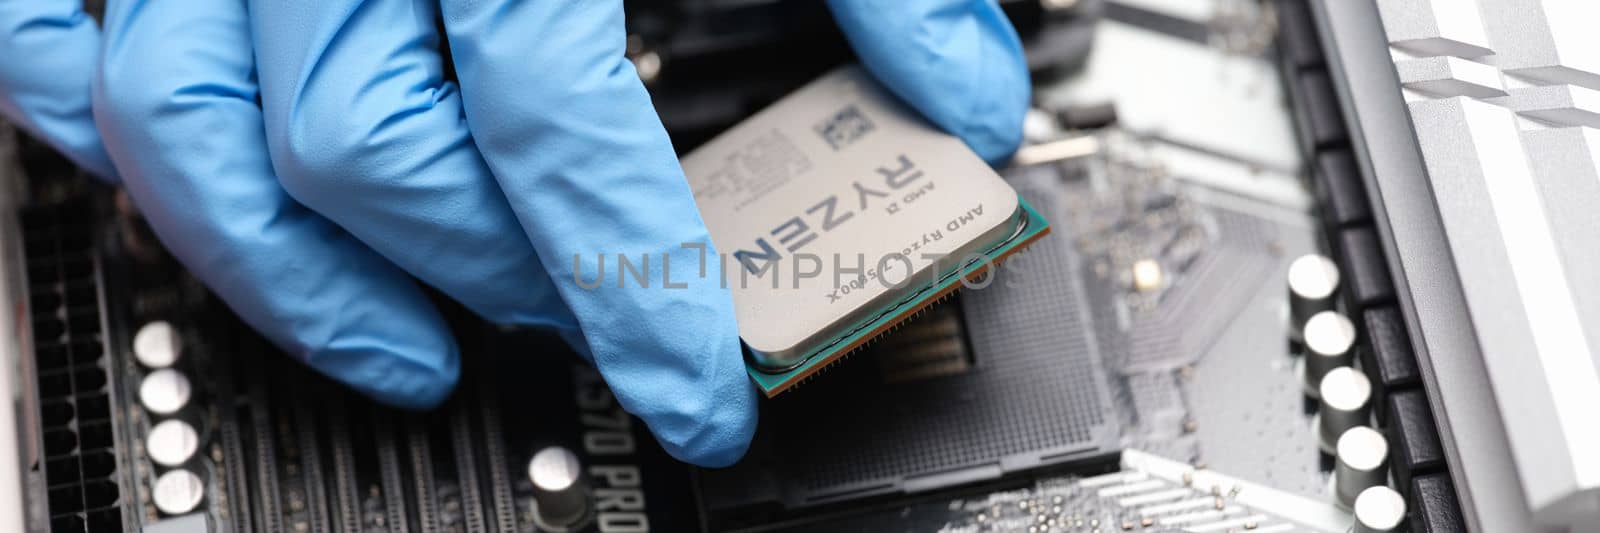 Tbilisi, Georgia - July 26, 2022: Installation of third generation Ryzen processor on motherboard. High performance microprocessor introduced by AMD concept